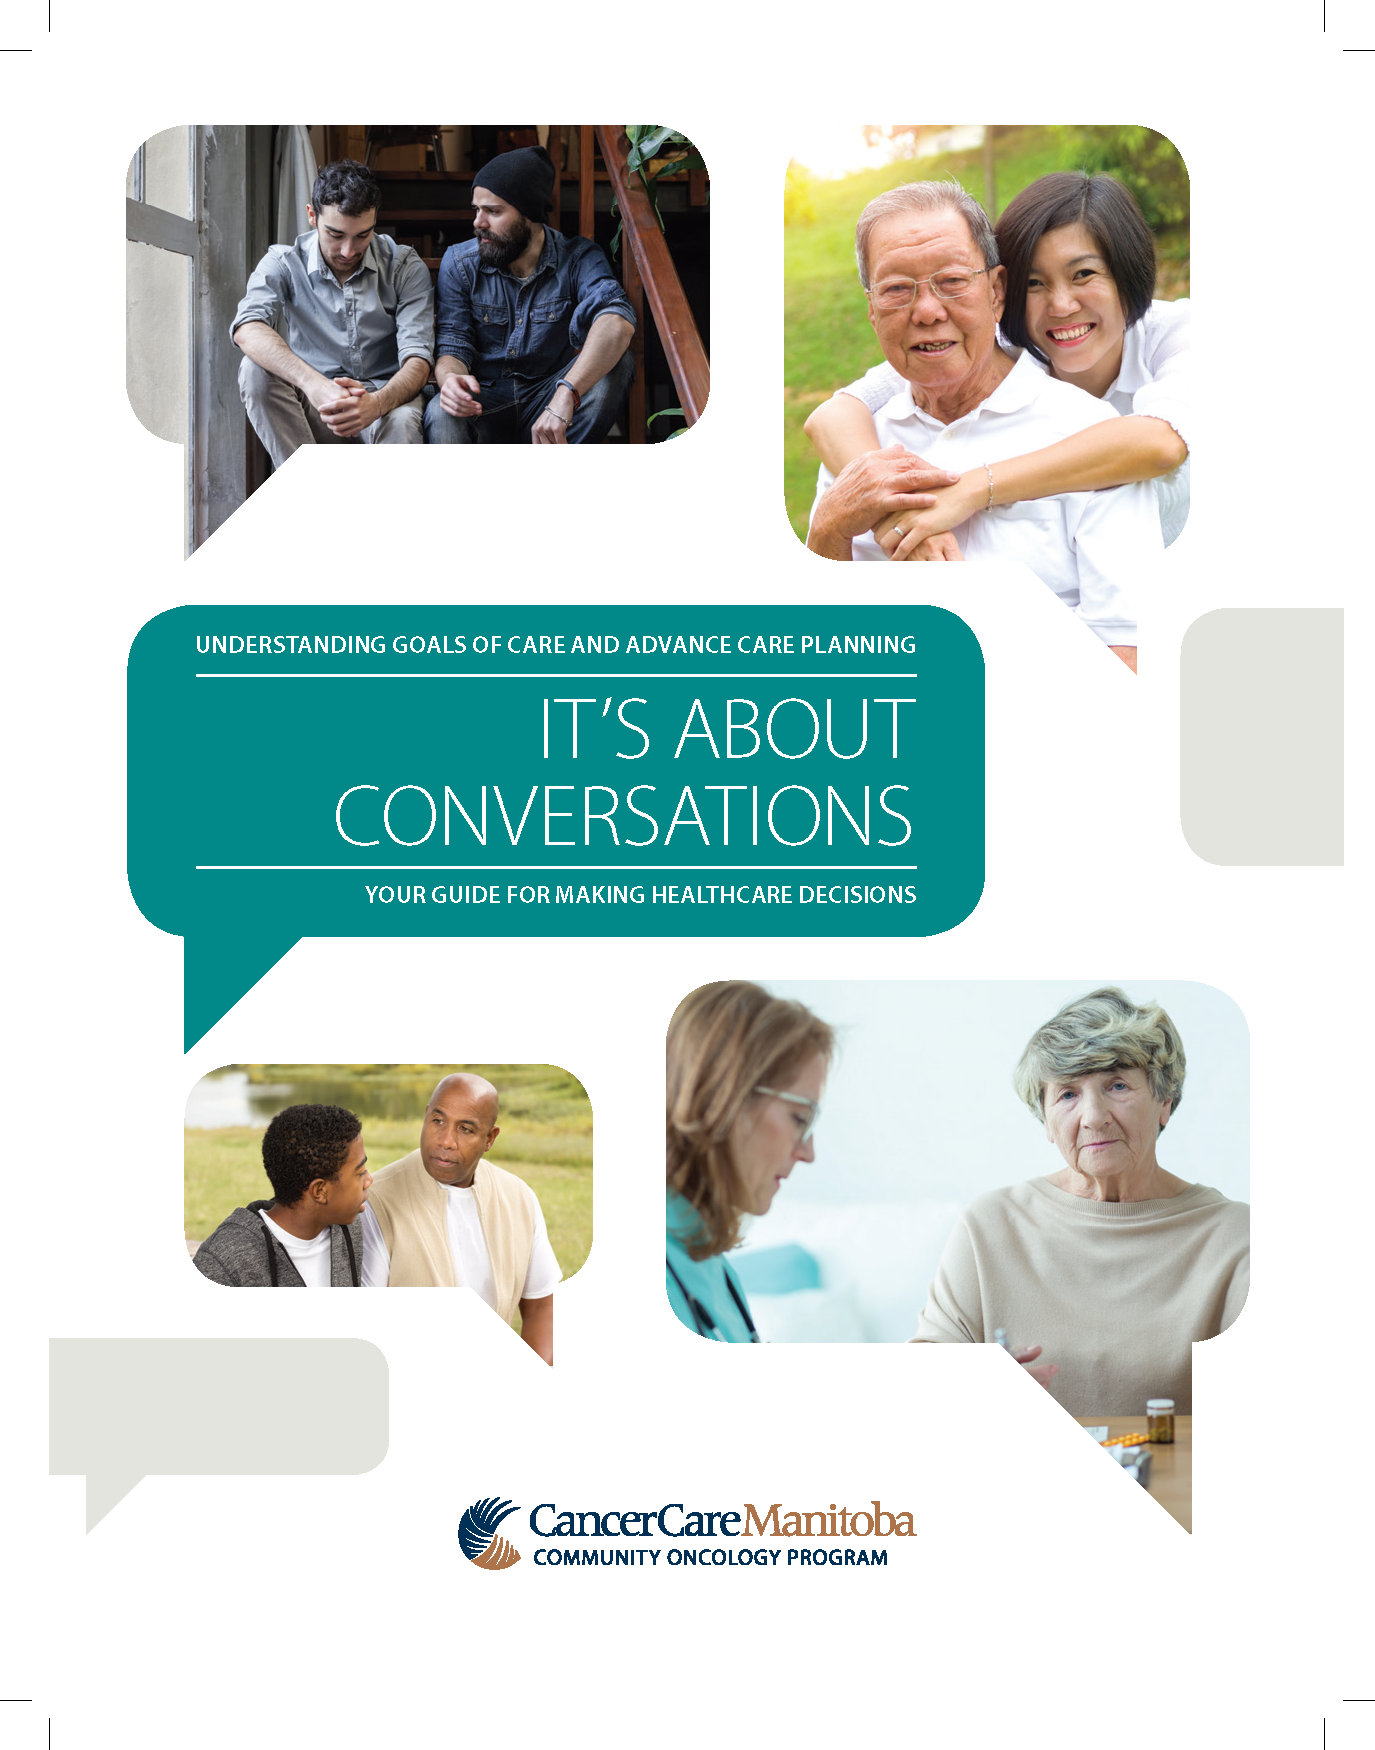 Cover of the Advance Care Planning Guide (c) CCMB